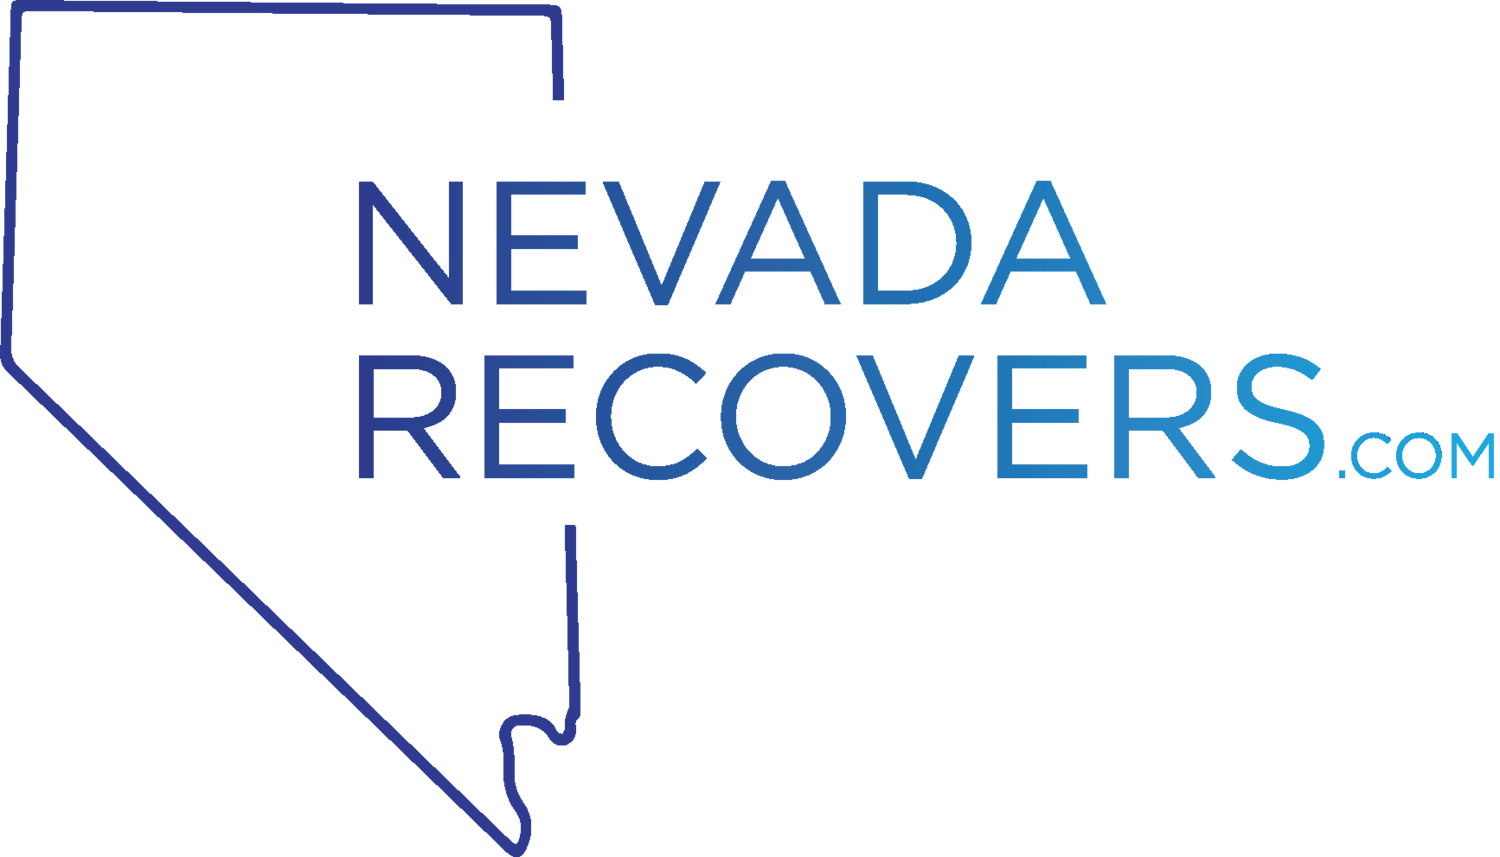 Nevada Recovers